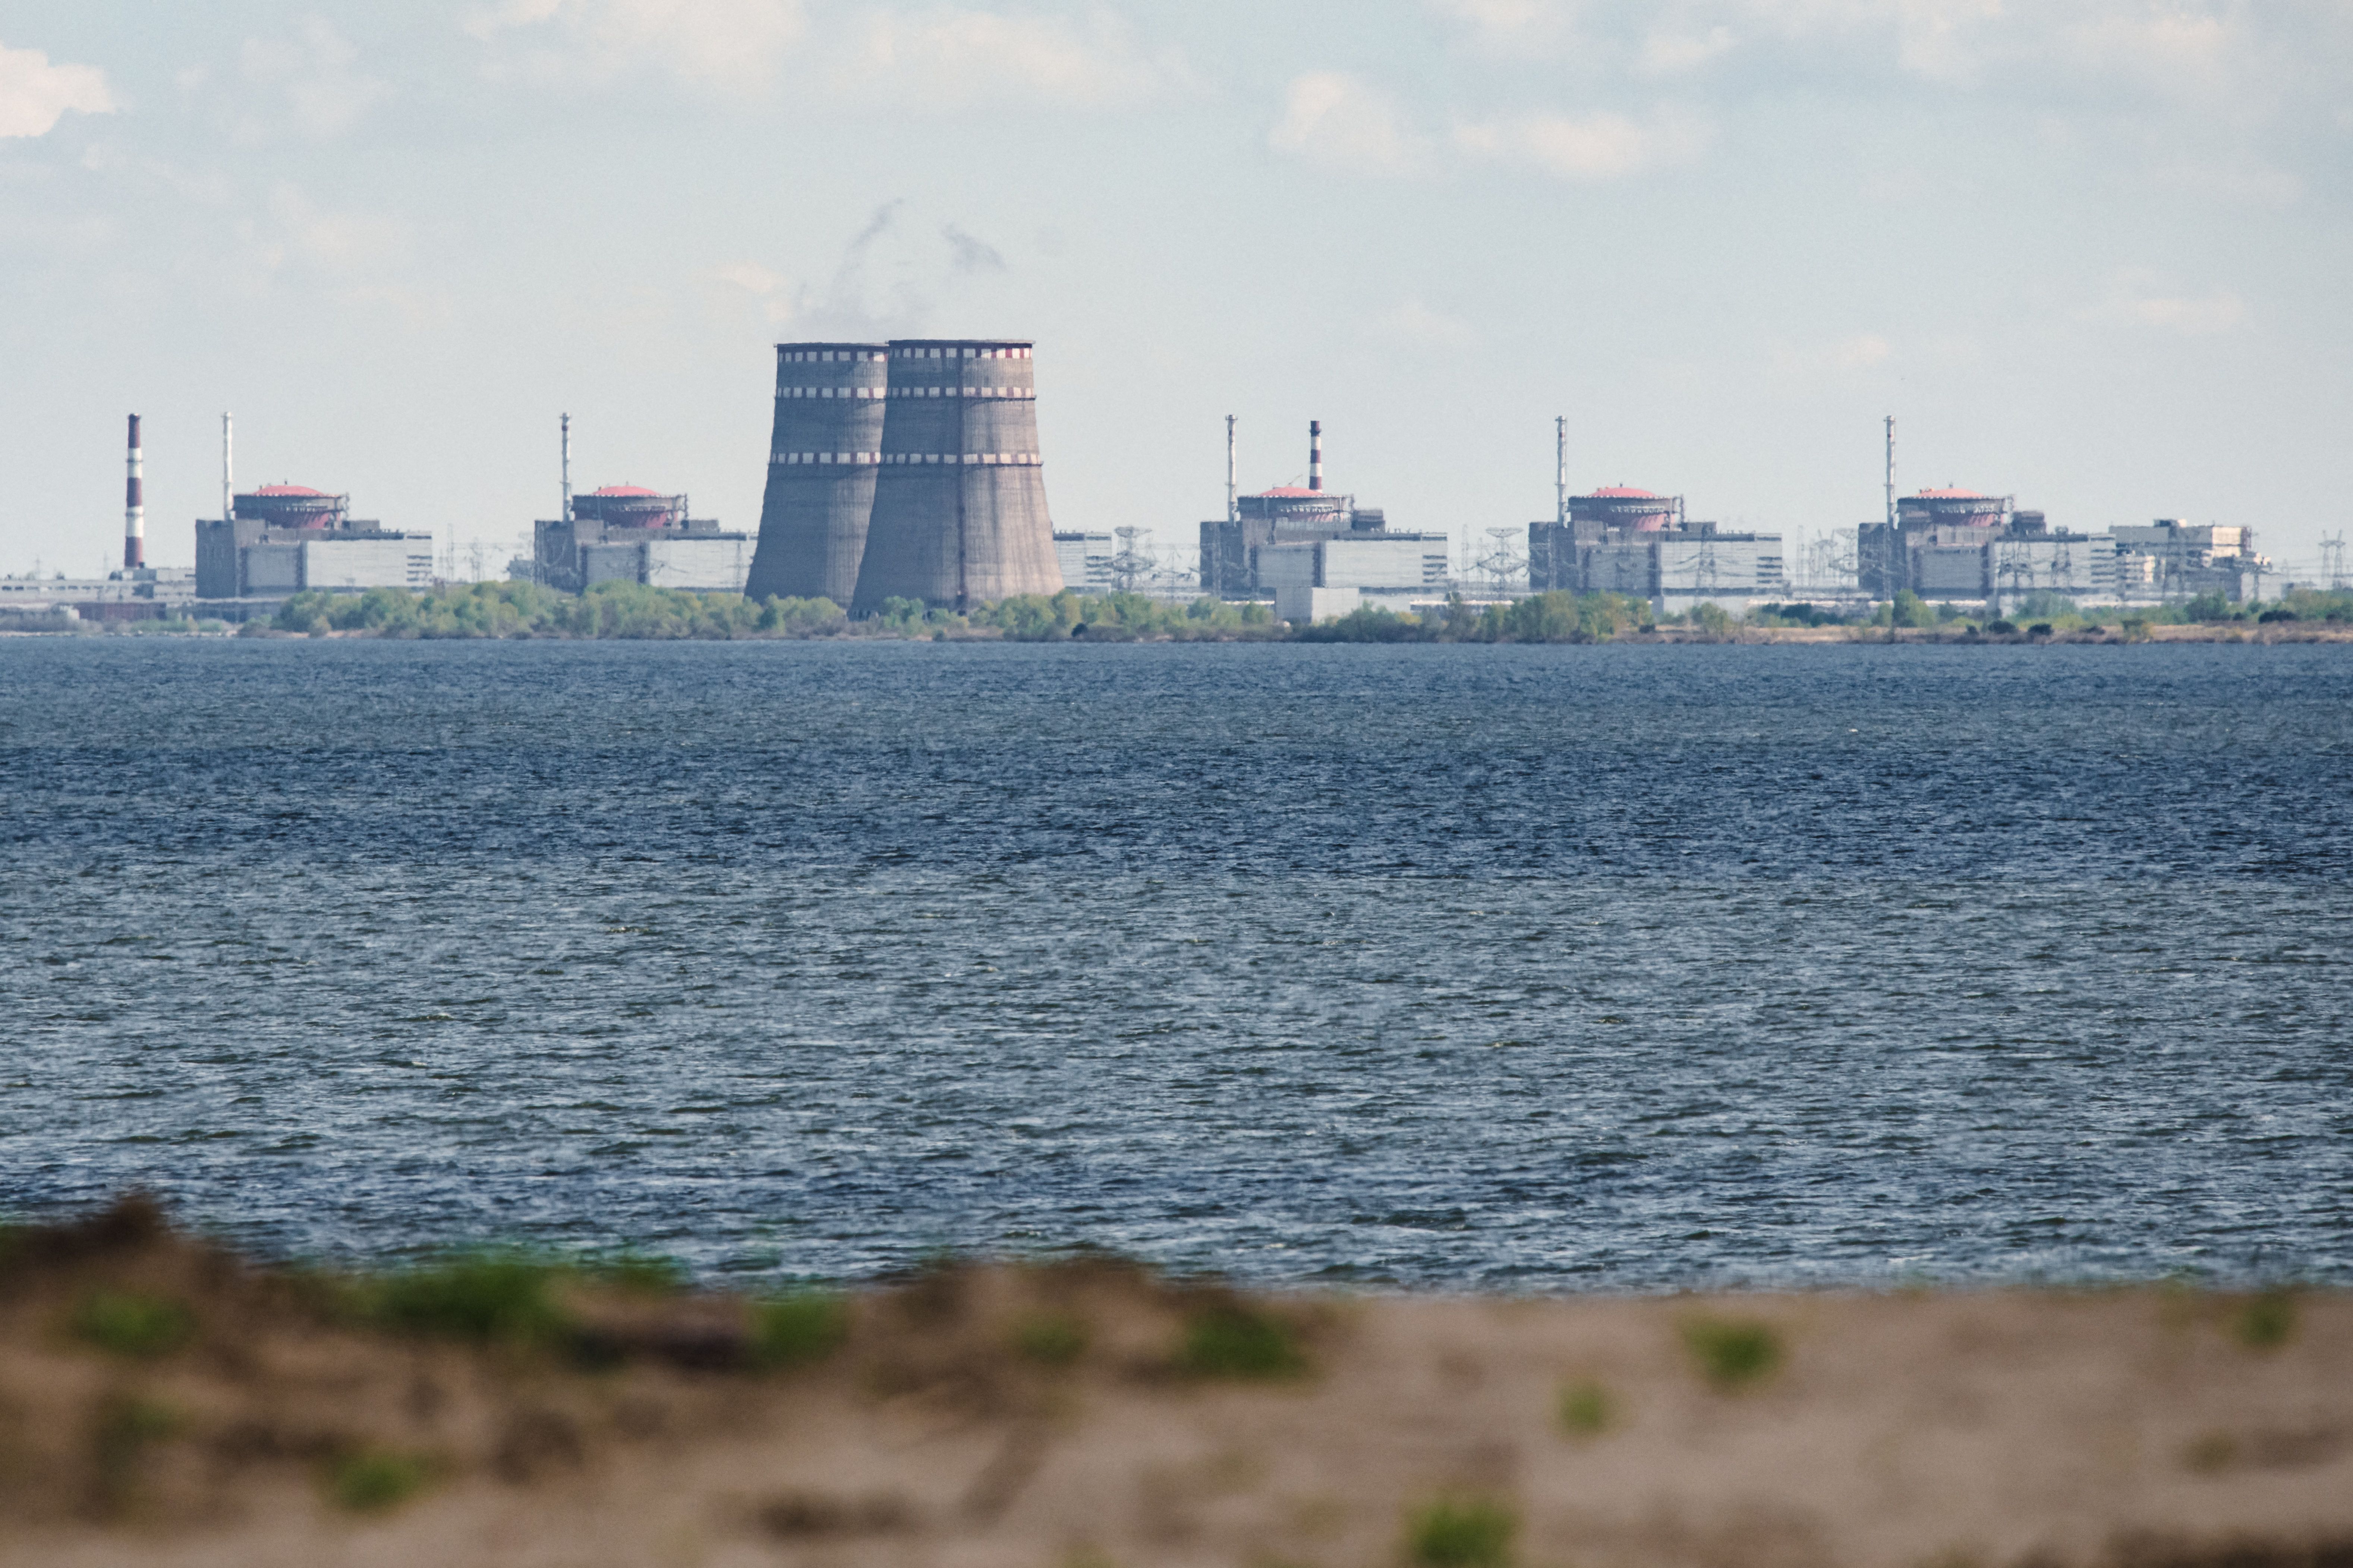 The Zaporizhzhia nuclear power plant is seen from Nikopol, Ukraine across the Dnipro River on April 27.